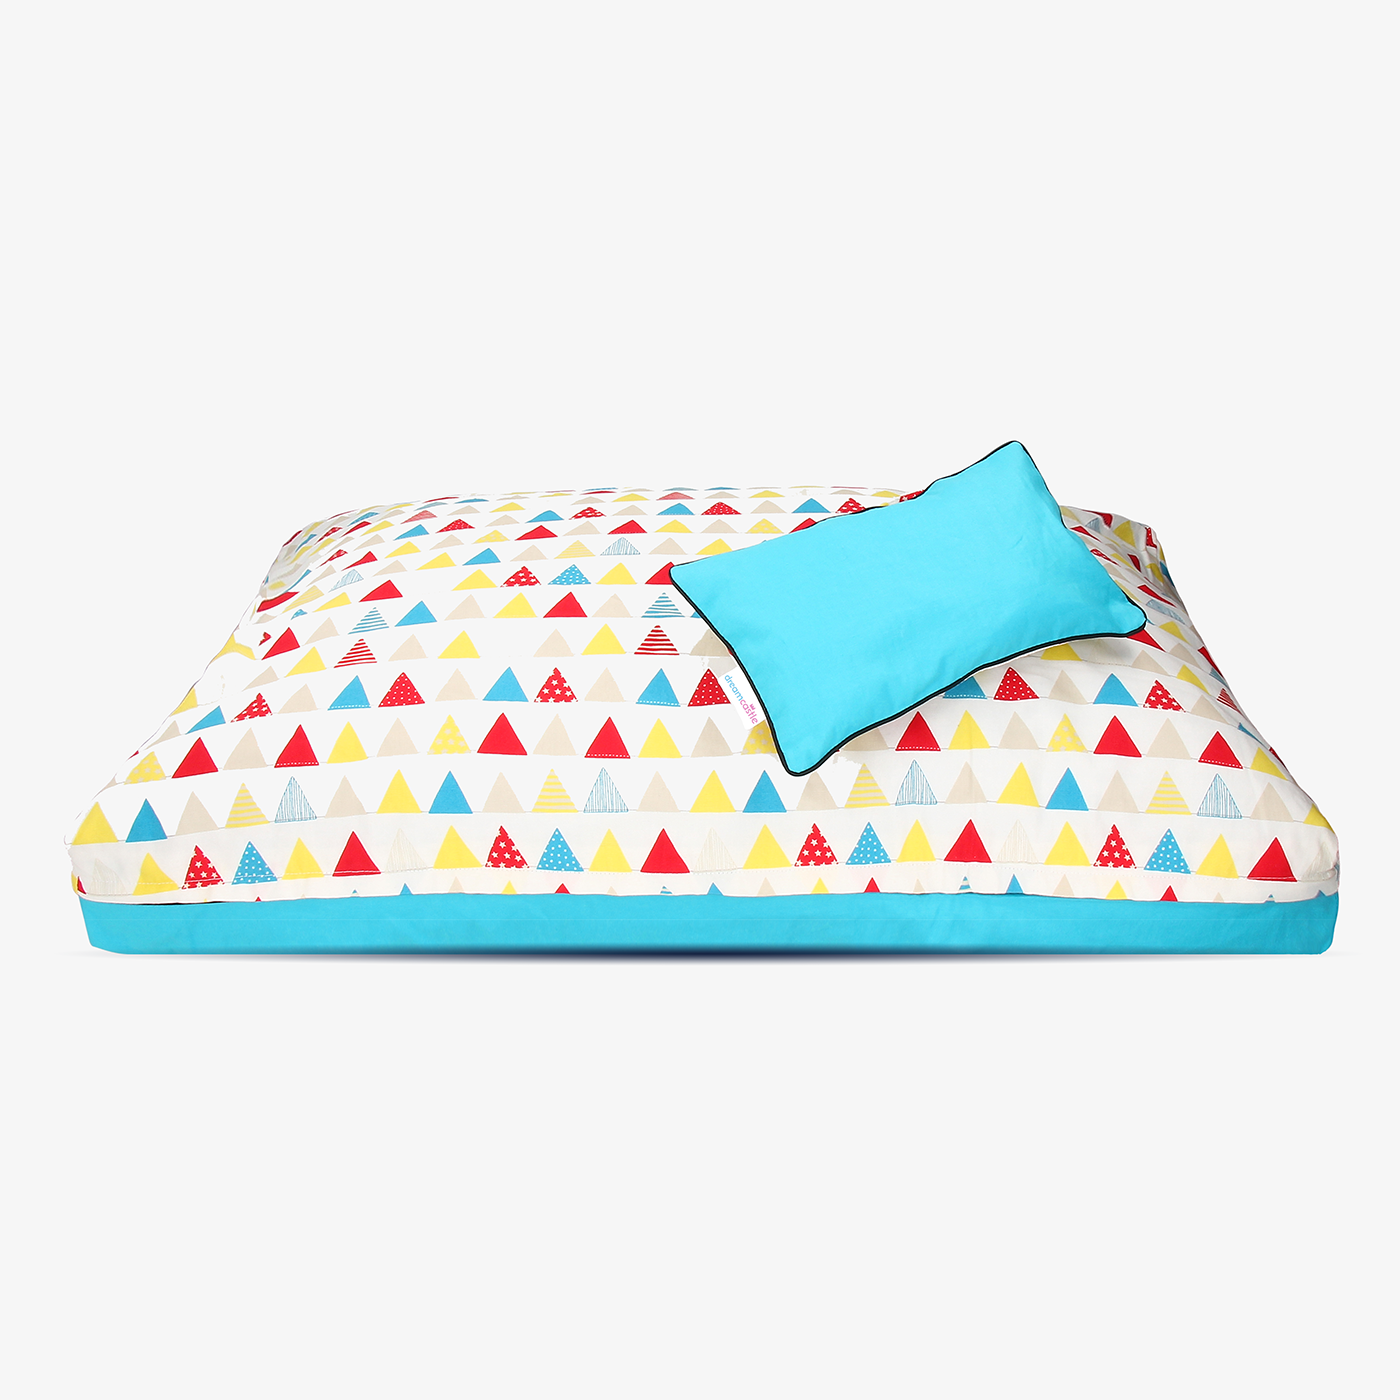 Pascal Triangle | Super cute & brightly designed natural dog bed cover from DreamCastle - Little Cherry